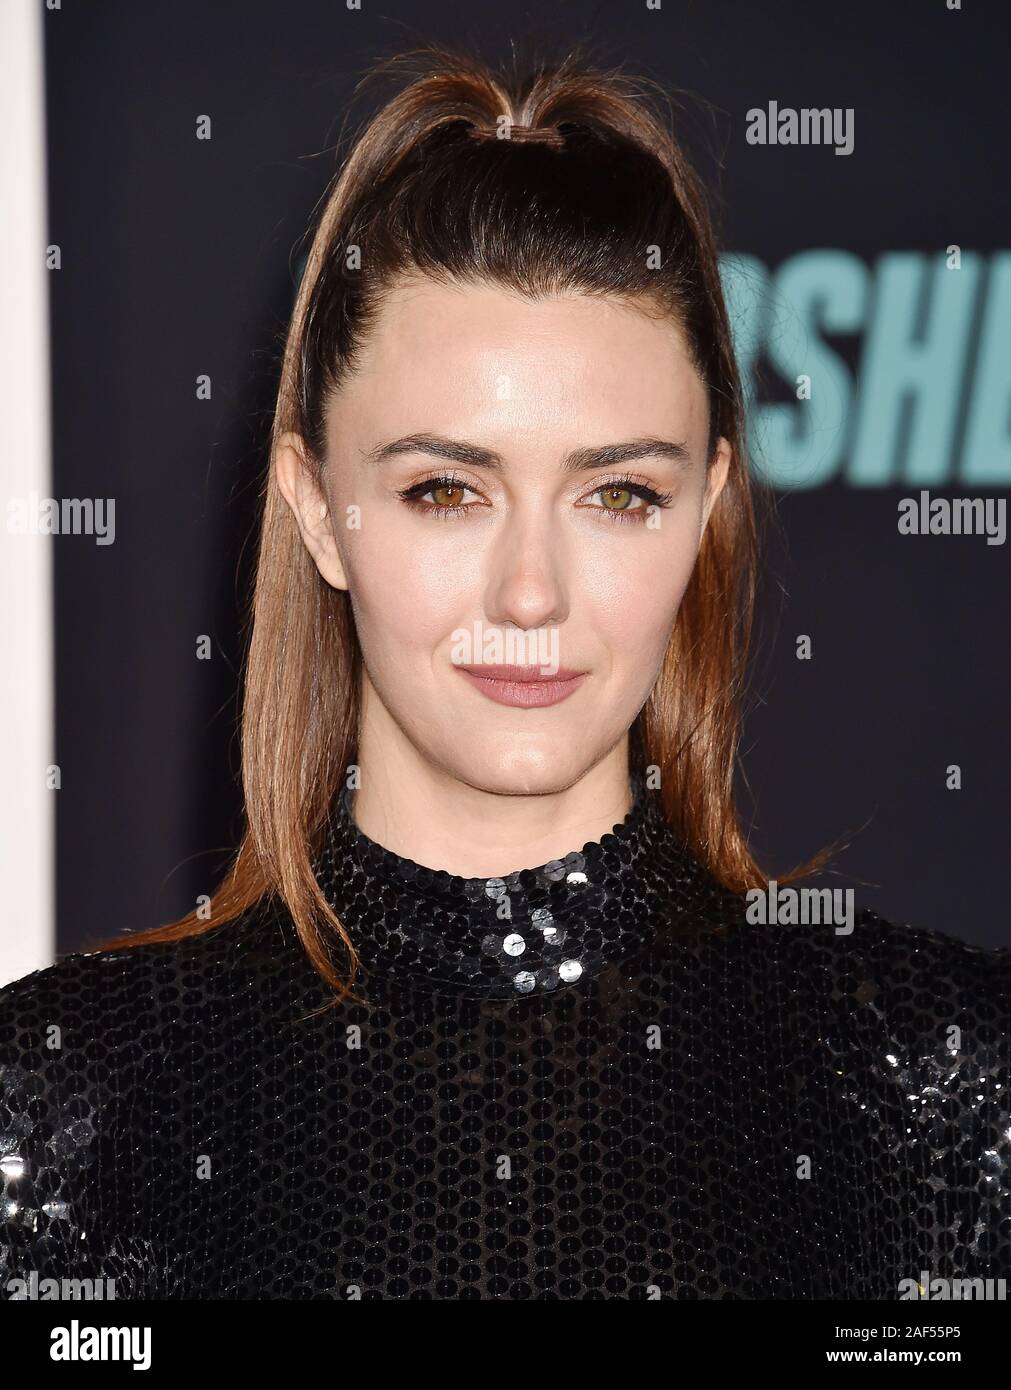 Westwood Ca December 10 Madeline Zima Attends A Special Screening Of Liongate S Bombshell At Regency Village Theatre On December 10 19 In Westwood California Stock Photo Alamy